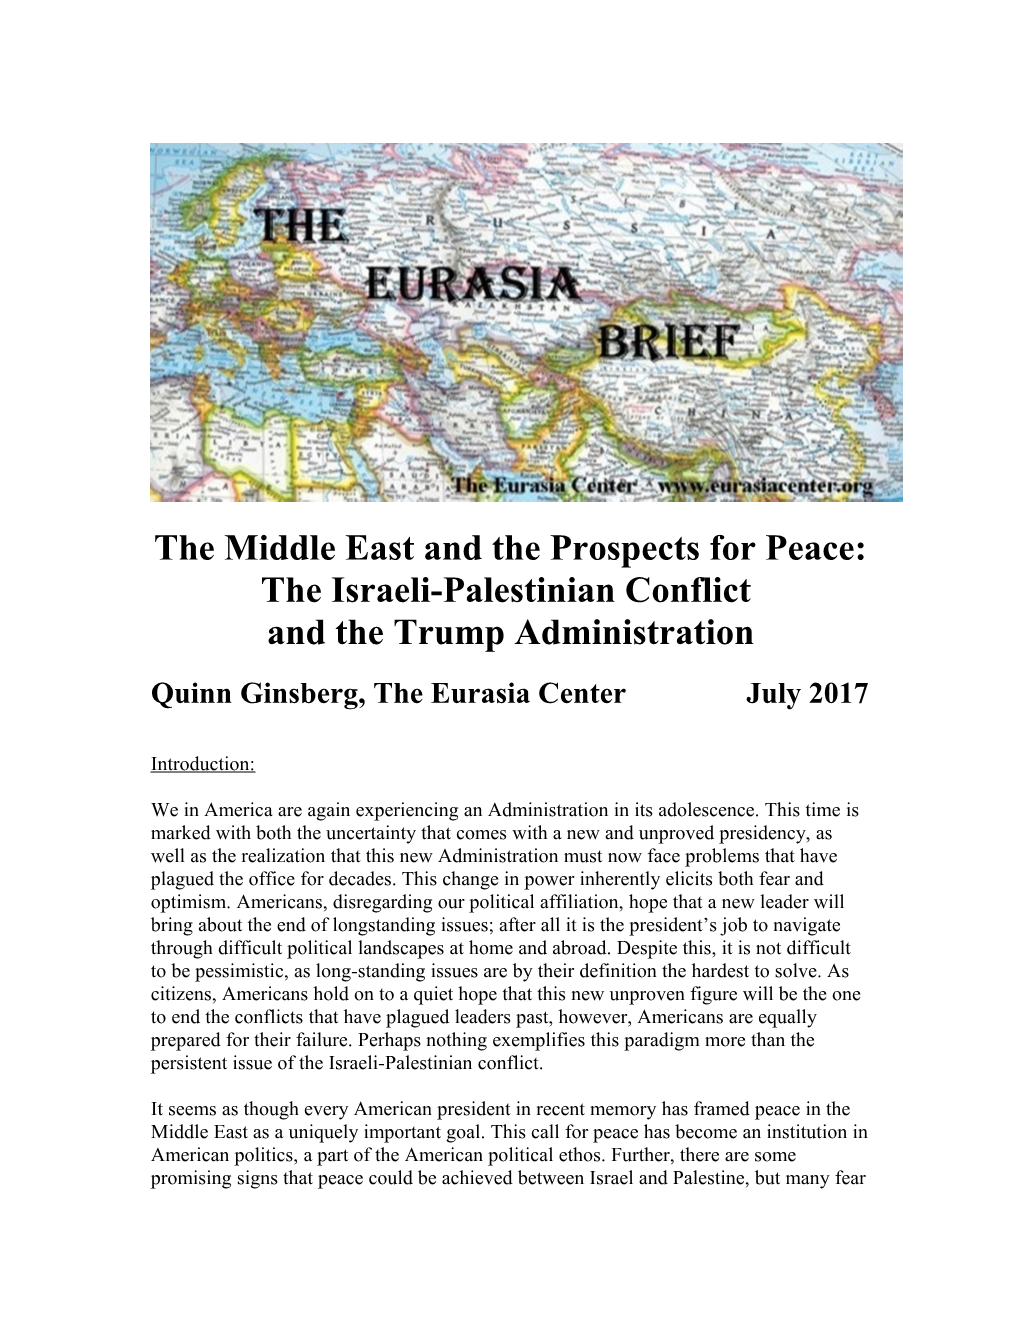 The Middle East and the Prospects for Peace